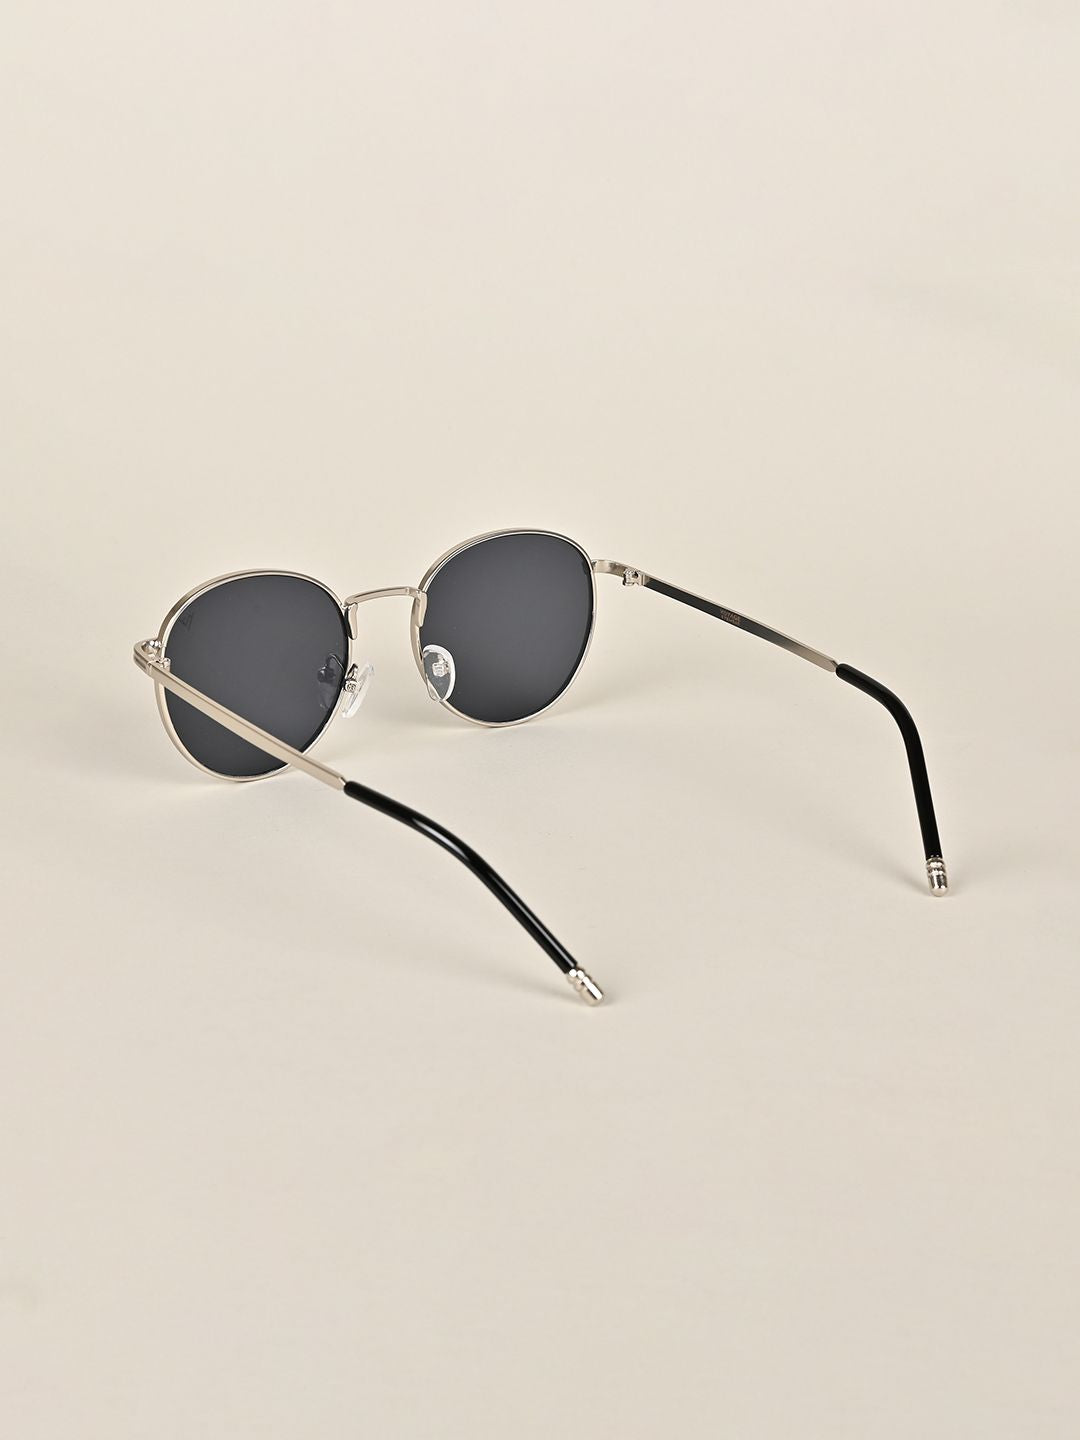 Sun Defender Classic Round Shades for Men and Women